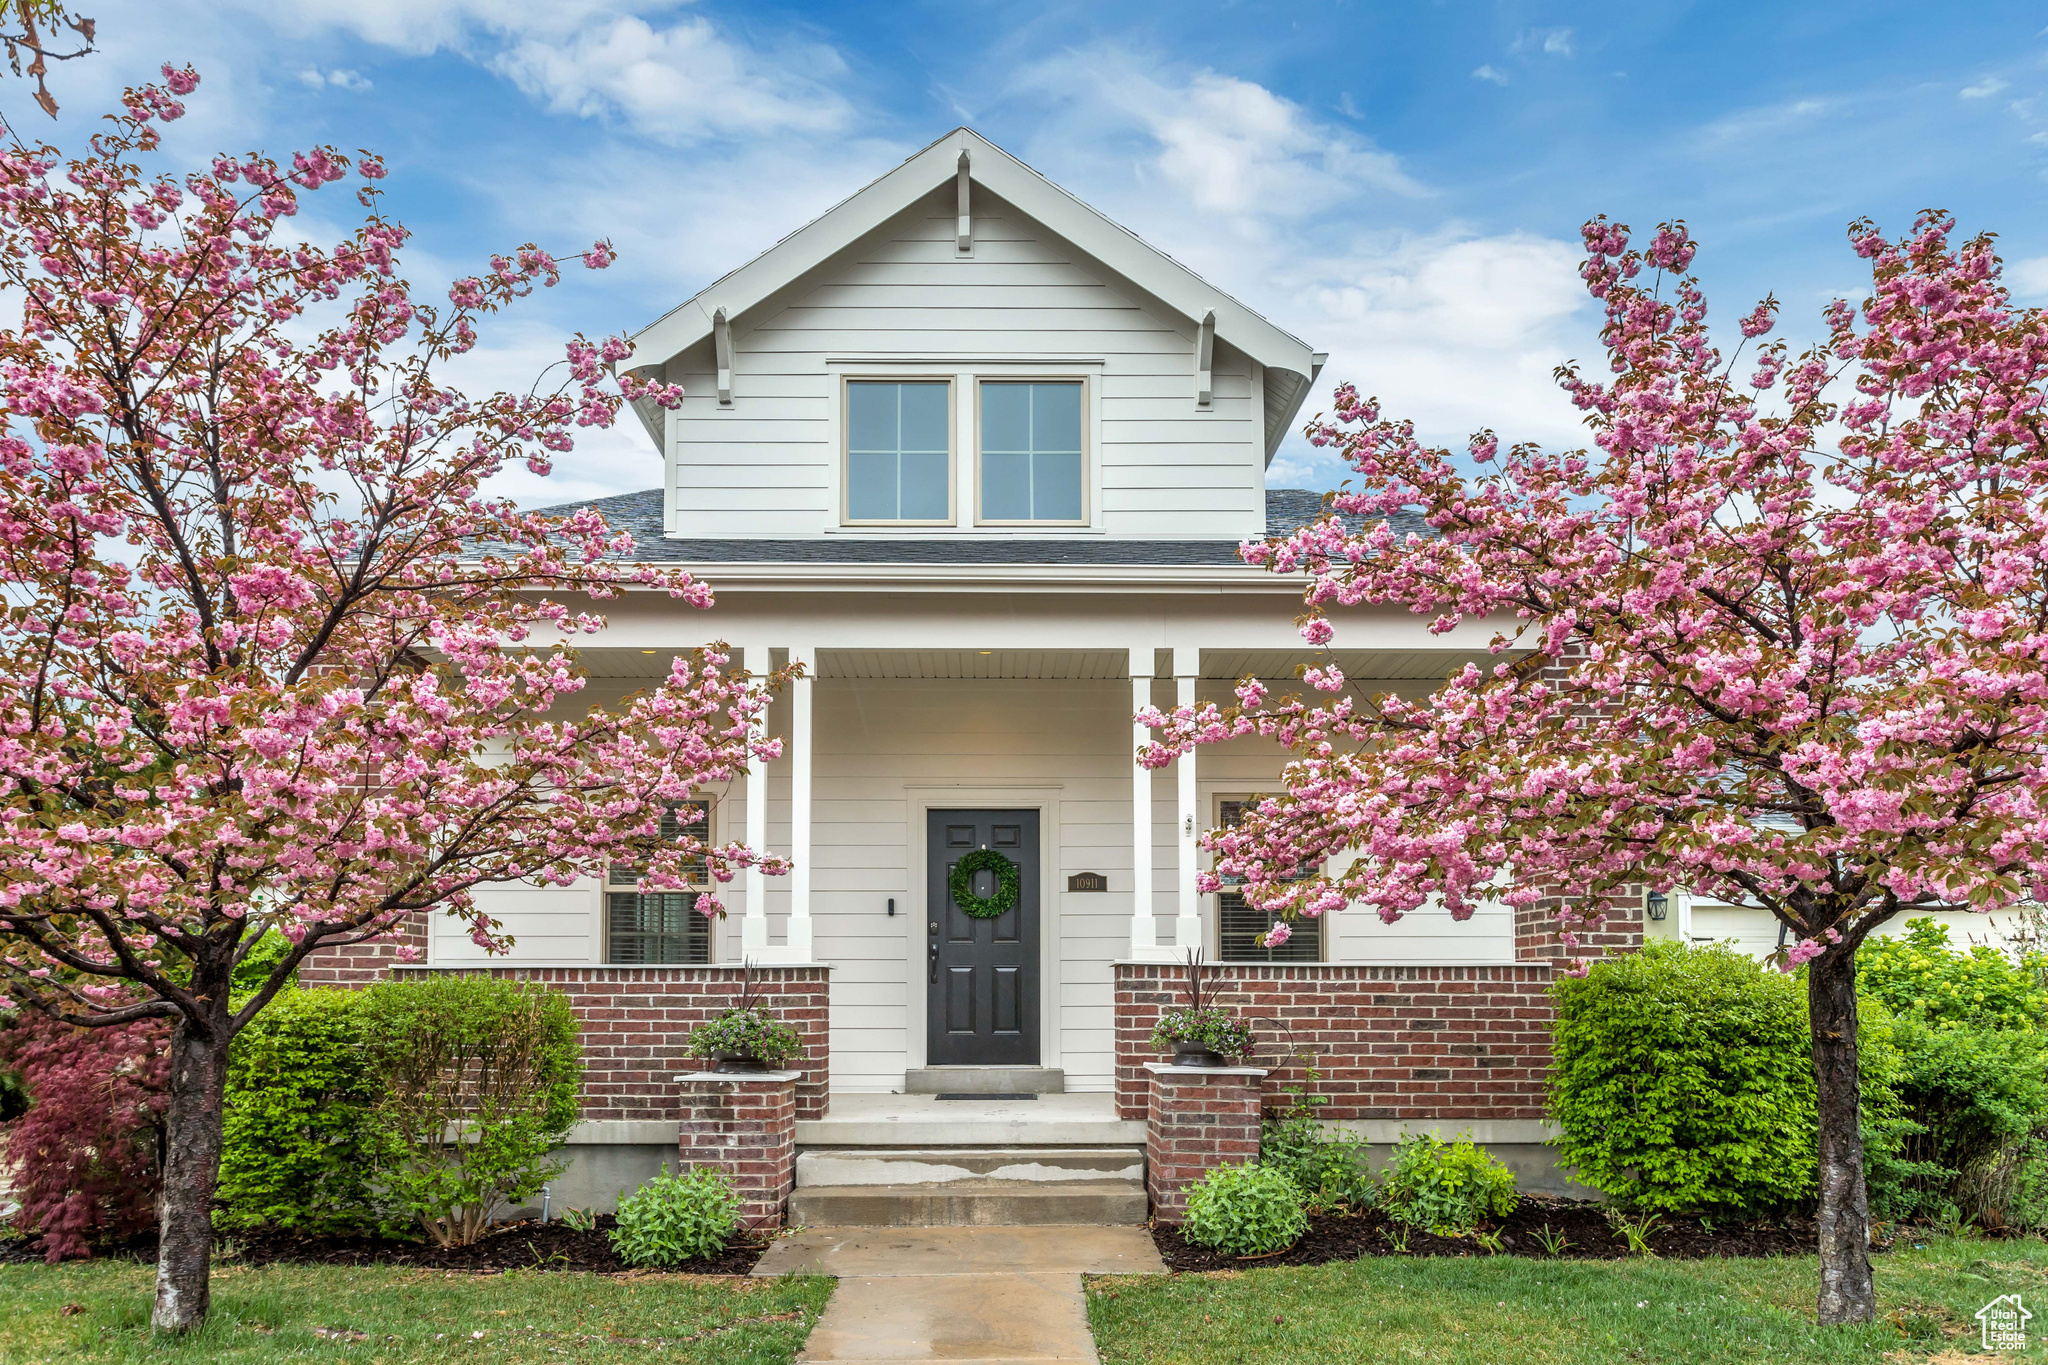 Welcome Home! Great curb appeal and front porch